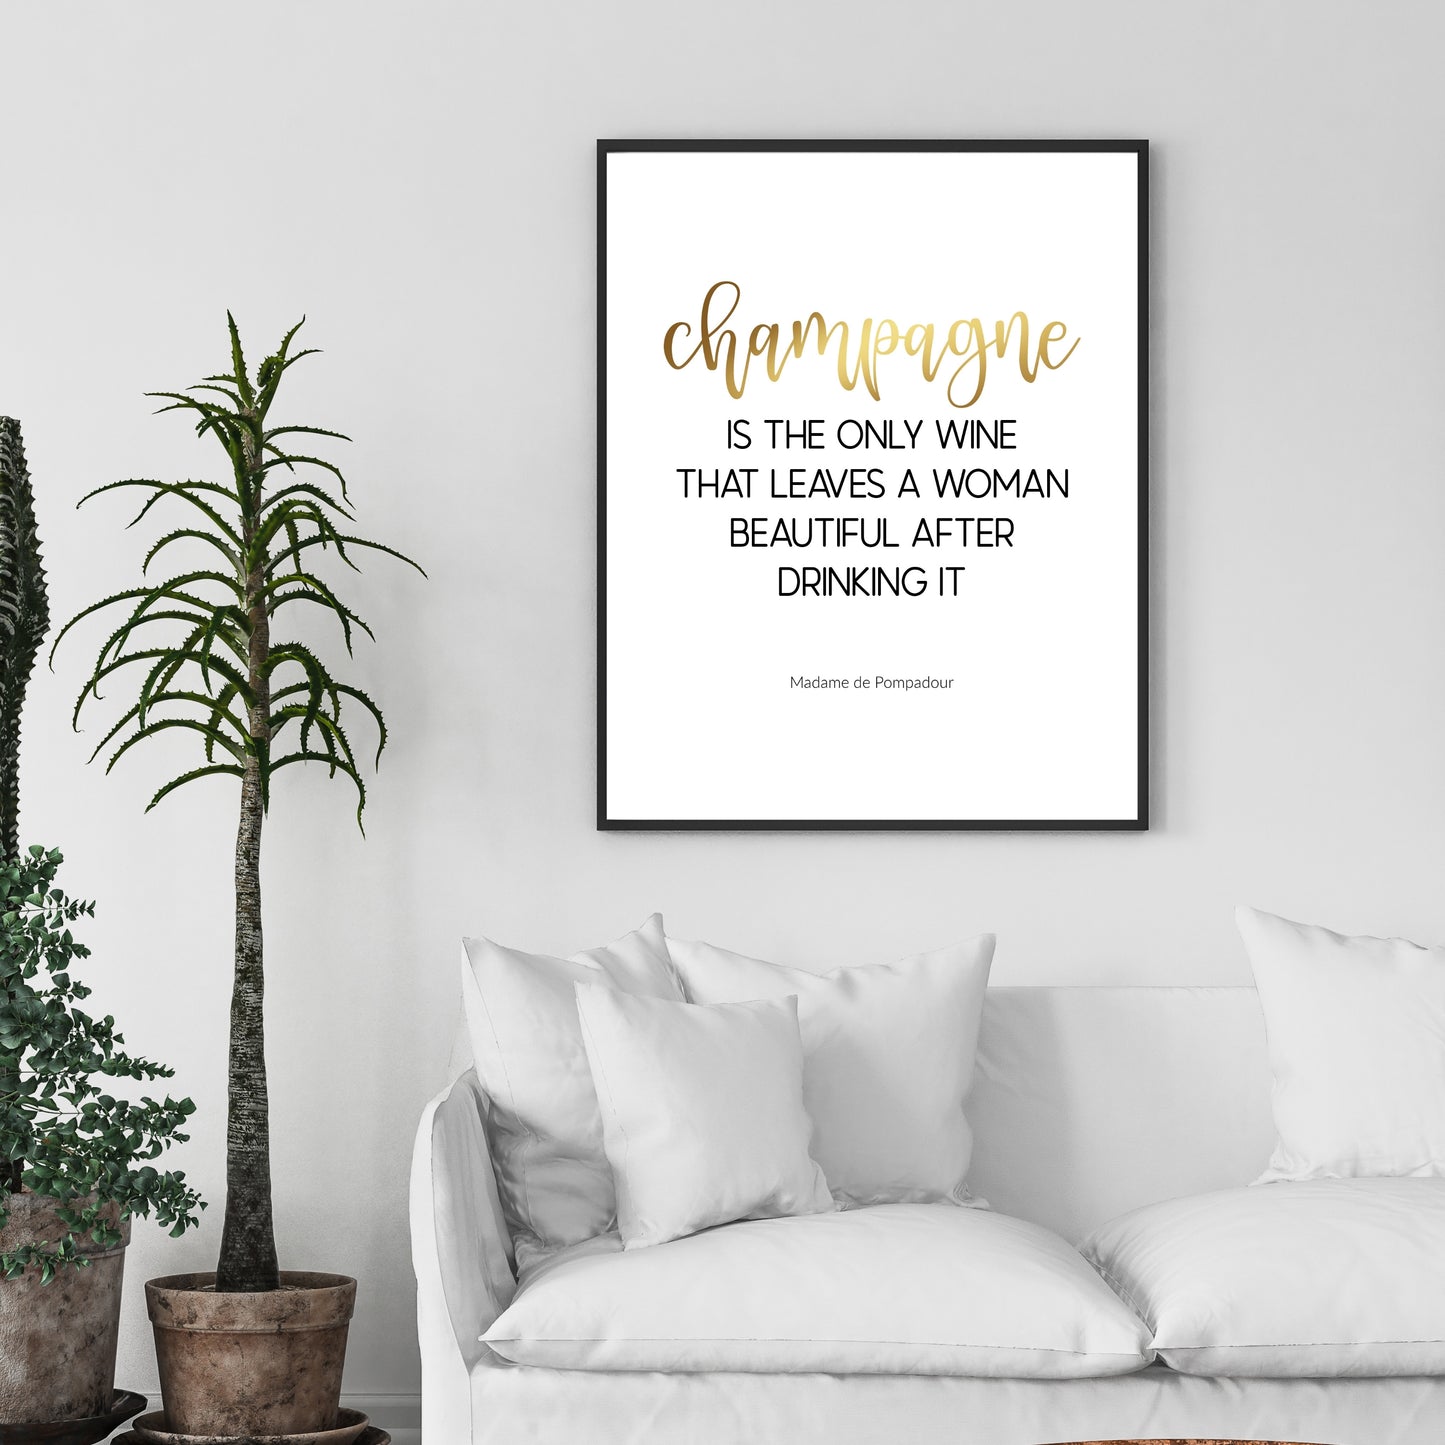 Champagne Quote By Madame de Pompadour In Gold, Printable Art